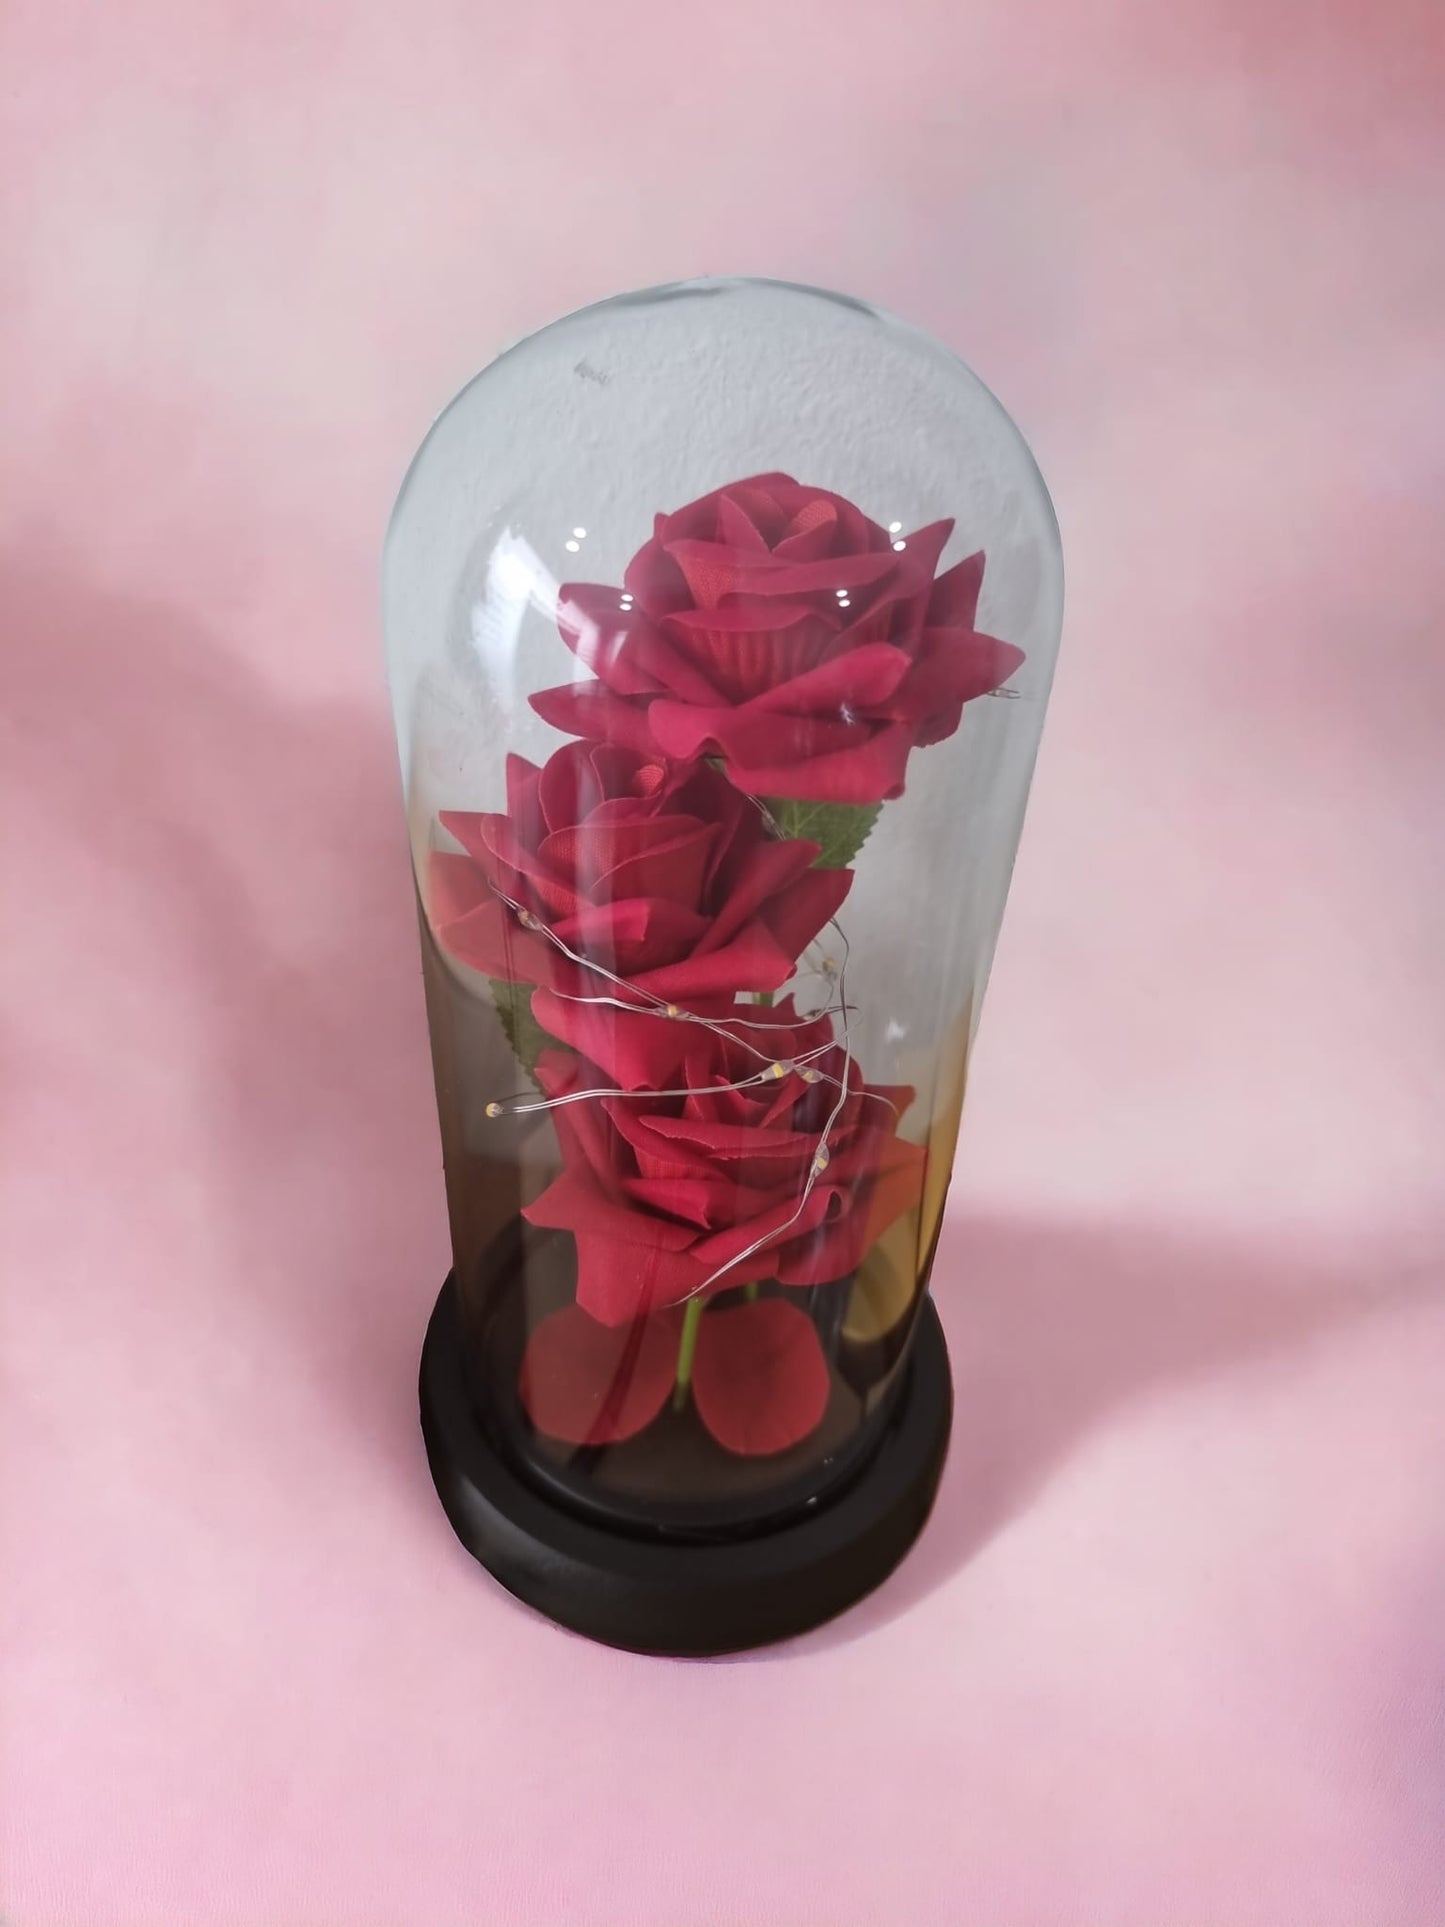 3 Red Roses in Glass Acrylic Cylinder with Lights - A Perfect Valentine's Day Gift - Auras Workshop  -   -   - Cyprus & Greece - Wholesale - Retail #